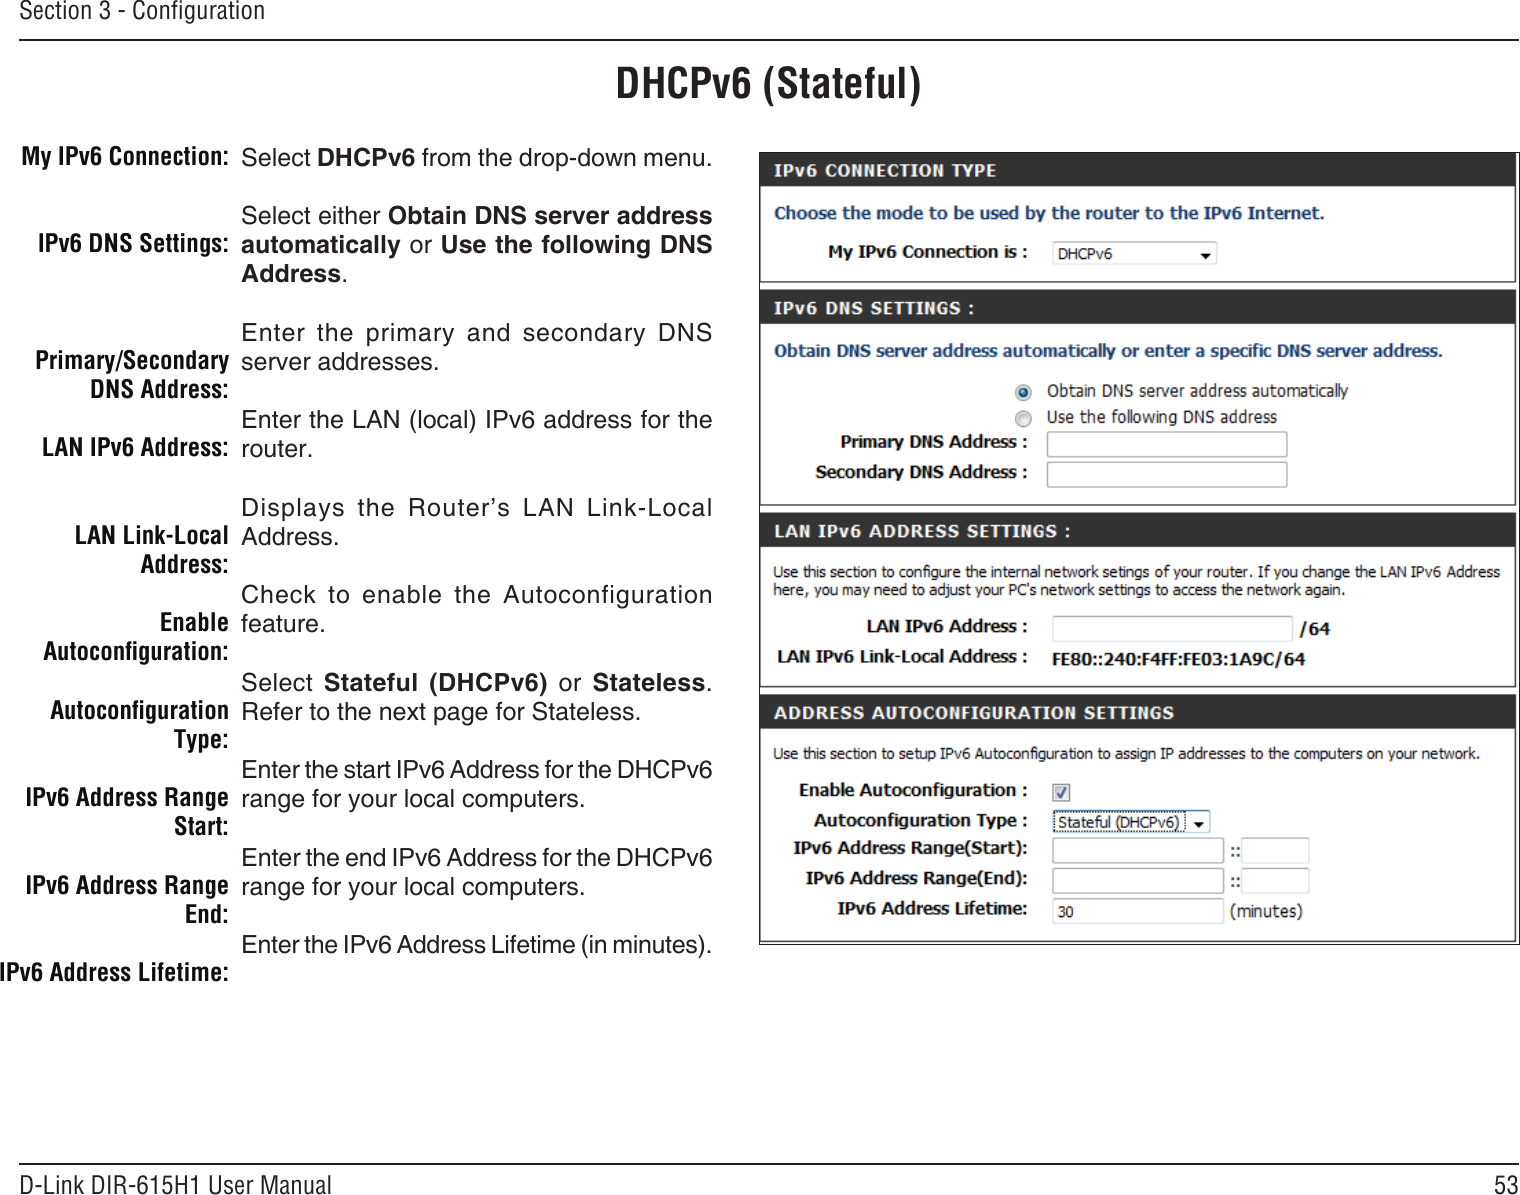 53D-Link DIR-615H1 User ManualSection 3 - CongurationDHCPv6 (Stateful)Select DHCPv6 from the drop-down menu.Select either Obtain DNS server address automatically or Use the following DNS Address.Enter  the  primary  and  secondary  DNS server addresses. Enter the LAN (local) IPv6 address for the router. Displays  the  Router’s  LAN  Link-Local Address.Check  to  enable  the  Autoconfiguration feature.Select  Stateful  (DHCPv6)  or  Stateless. Refer to the next page for Stateless.Enter the start IPv6 Address for the DHCPv6 range for your local computers.Enter the end IPv6 Address for the DHCPv6 range for your local computers.Enter the IPv6 Address Lifetime (in minutes).My IPv6 Connection:IPv6 DNS Settings:Primary/Secondary DNS Address:LAN IPv6 Address:LAN Link-Local Address:Enable Autoconguration:Autoconguration Type:IPv6 Address Range Start:IPv6 Address Range End:IPv6 Address Lifetime: